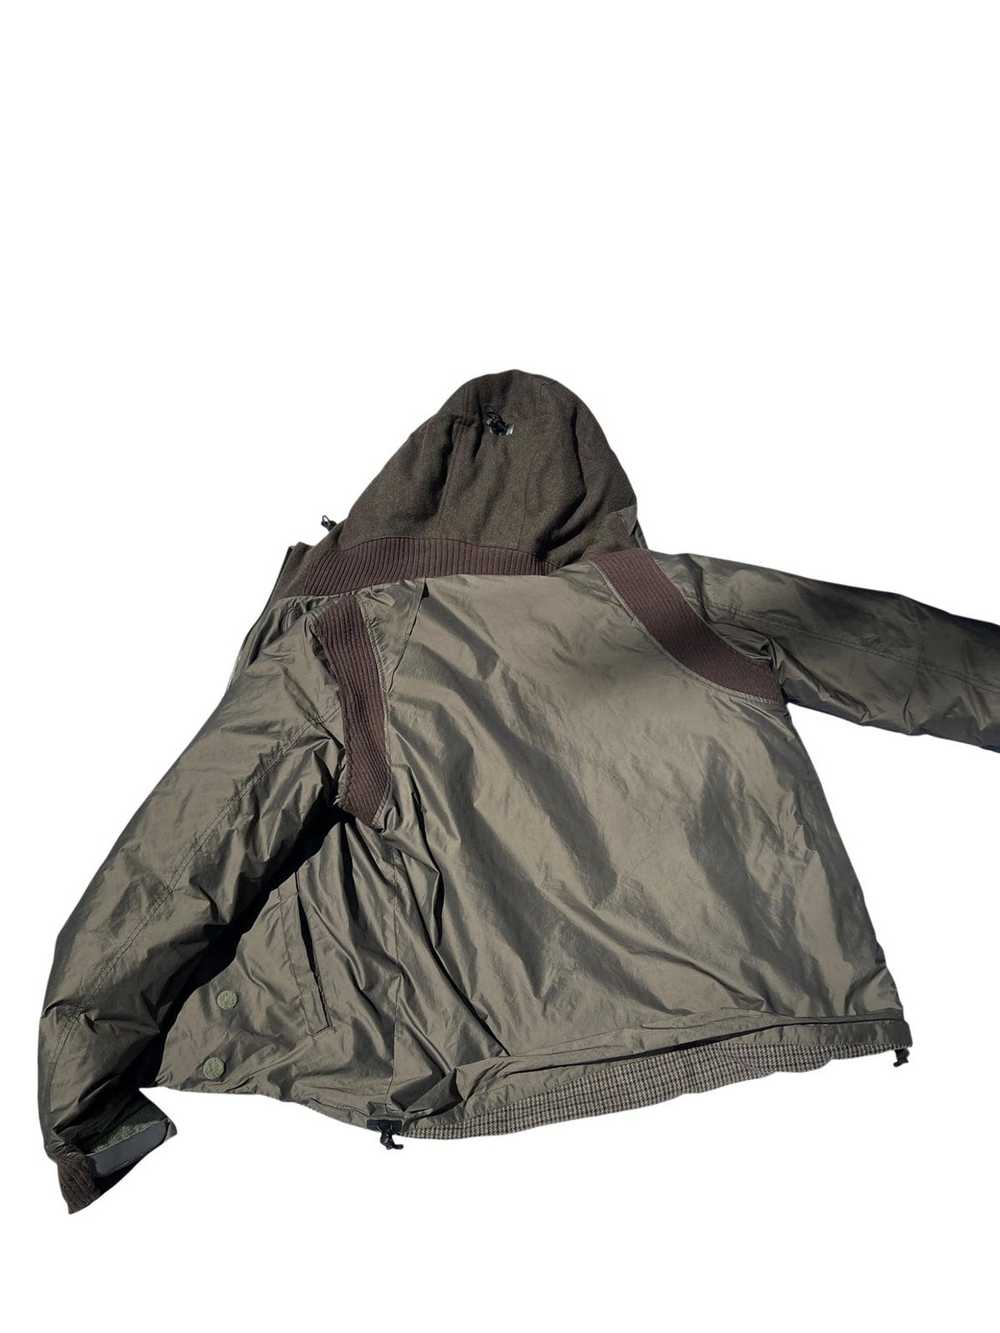 Undercover Undercover Knit Tech/Puffer Jacket 07 - image 5